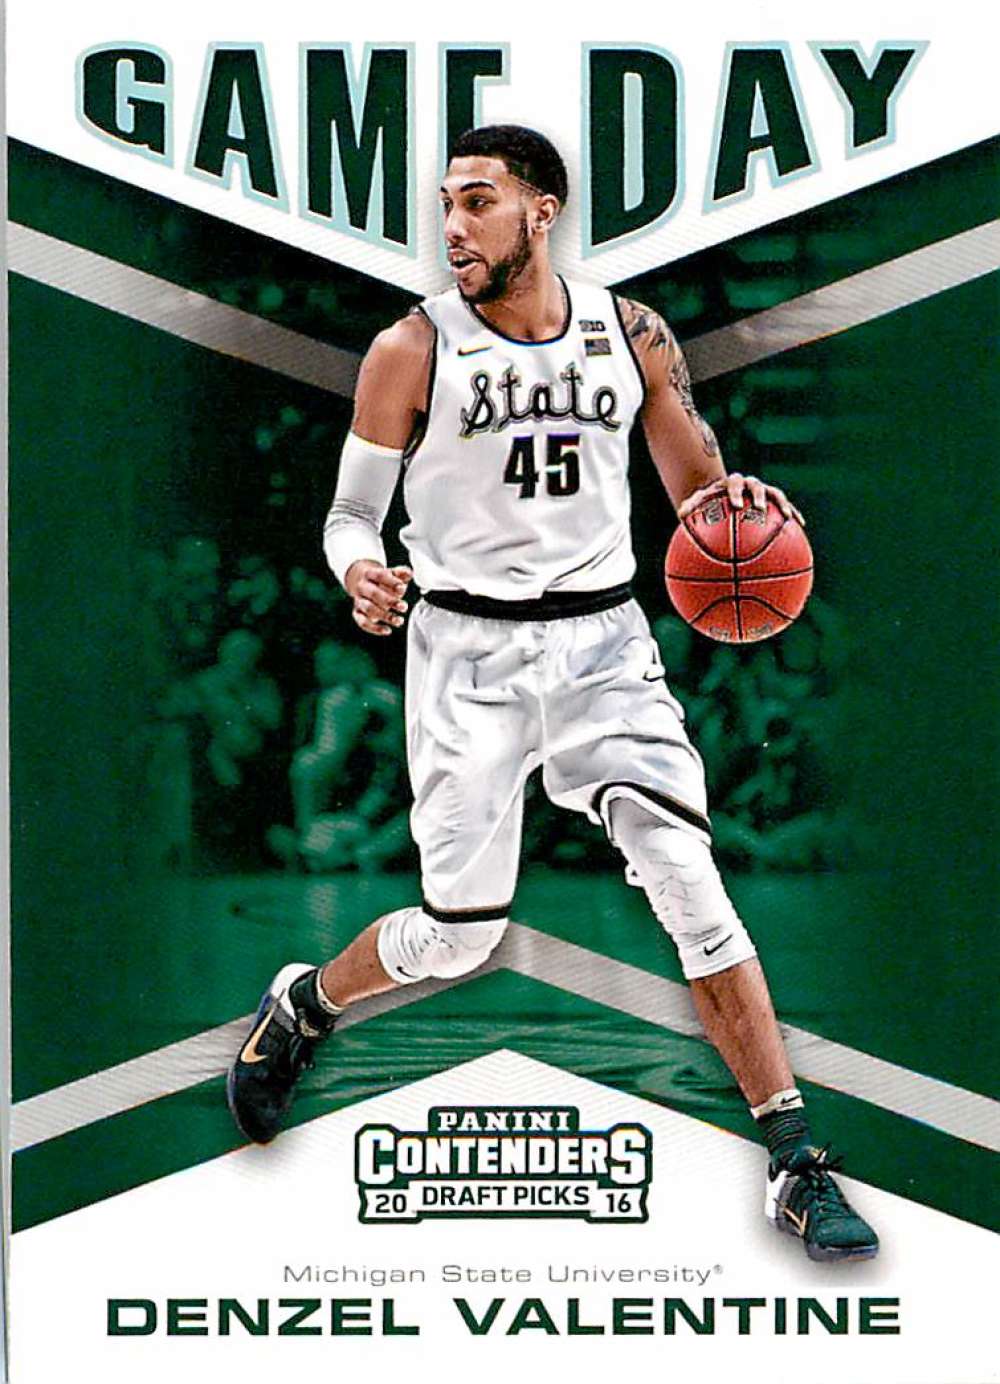 2016-17 Panini Contenders Draft Picks Game Day #12 DENZEL VALENTINE Michigan State Spartans 